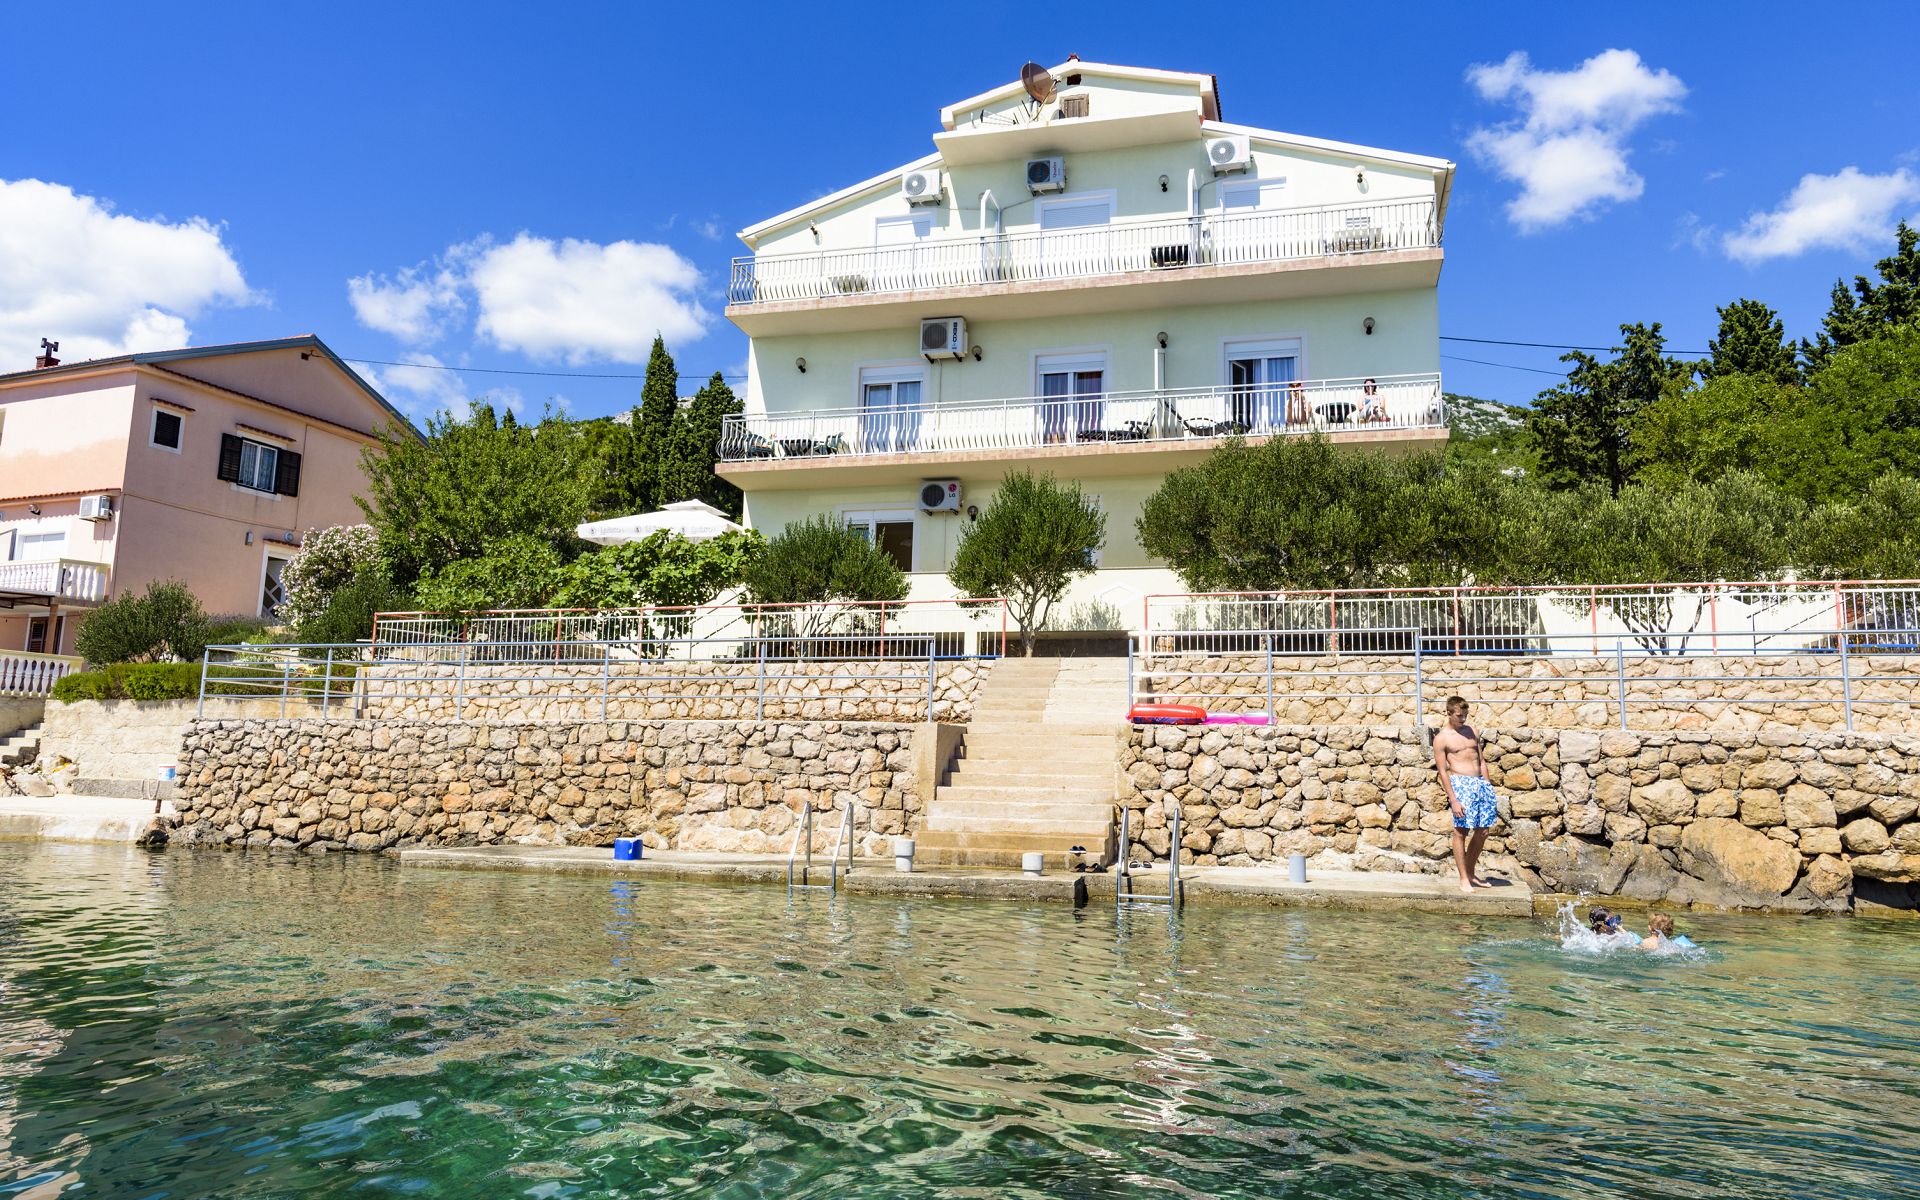 Apartment Toma - 5m from the sea with parking: A2 Lukovo Sugarje, Riviera Senj 0